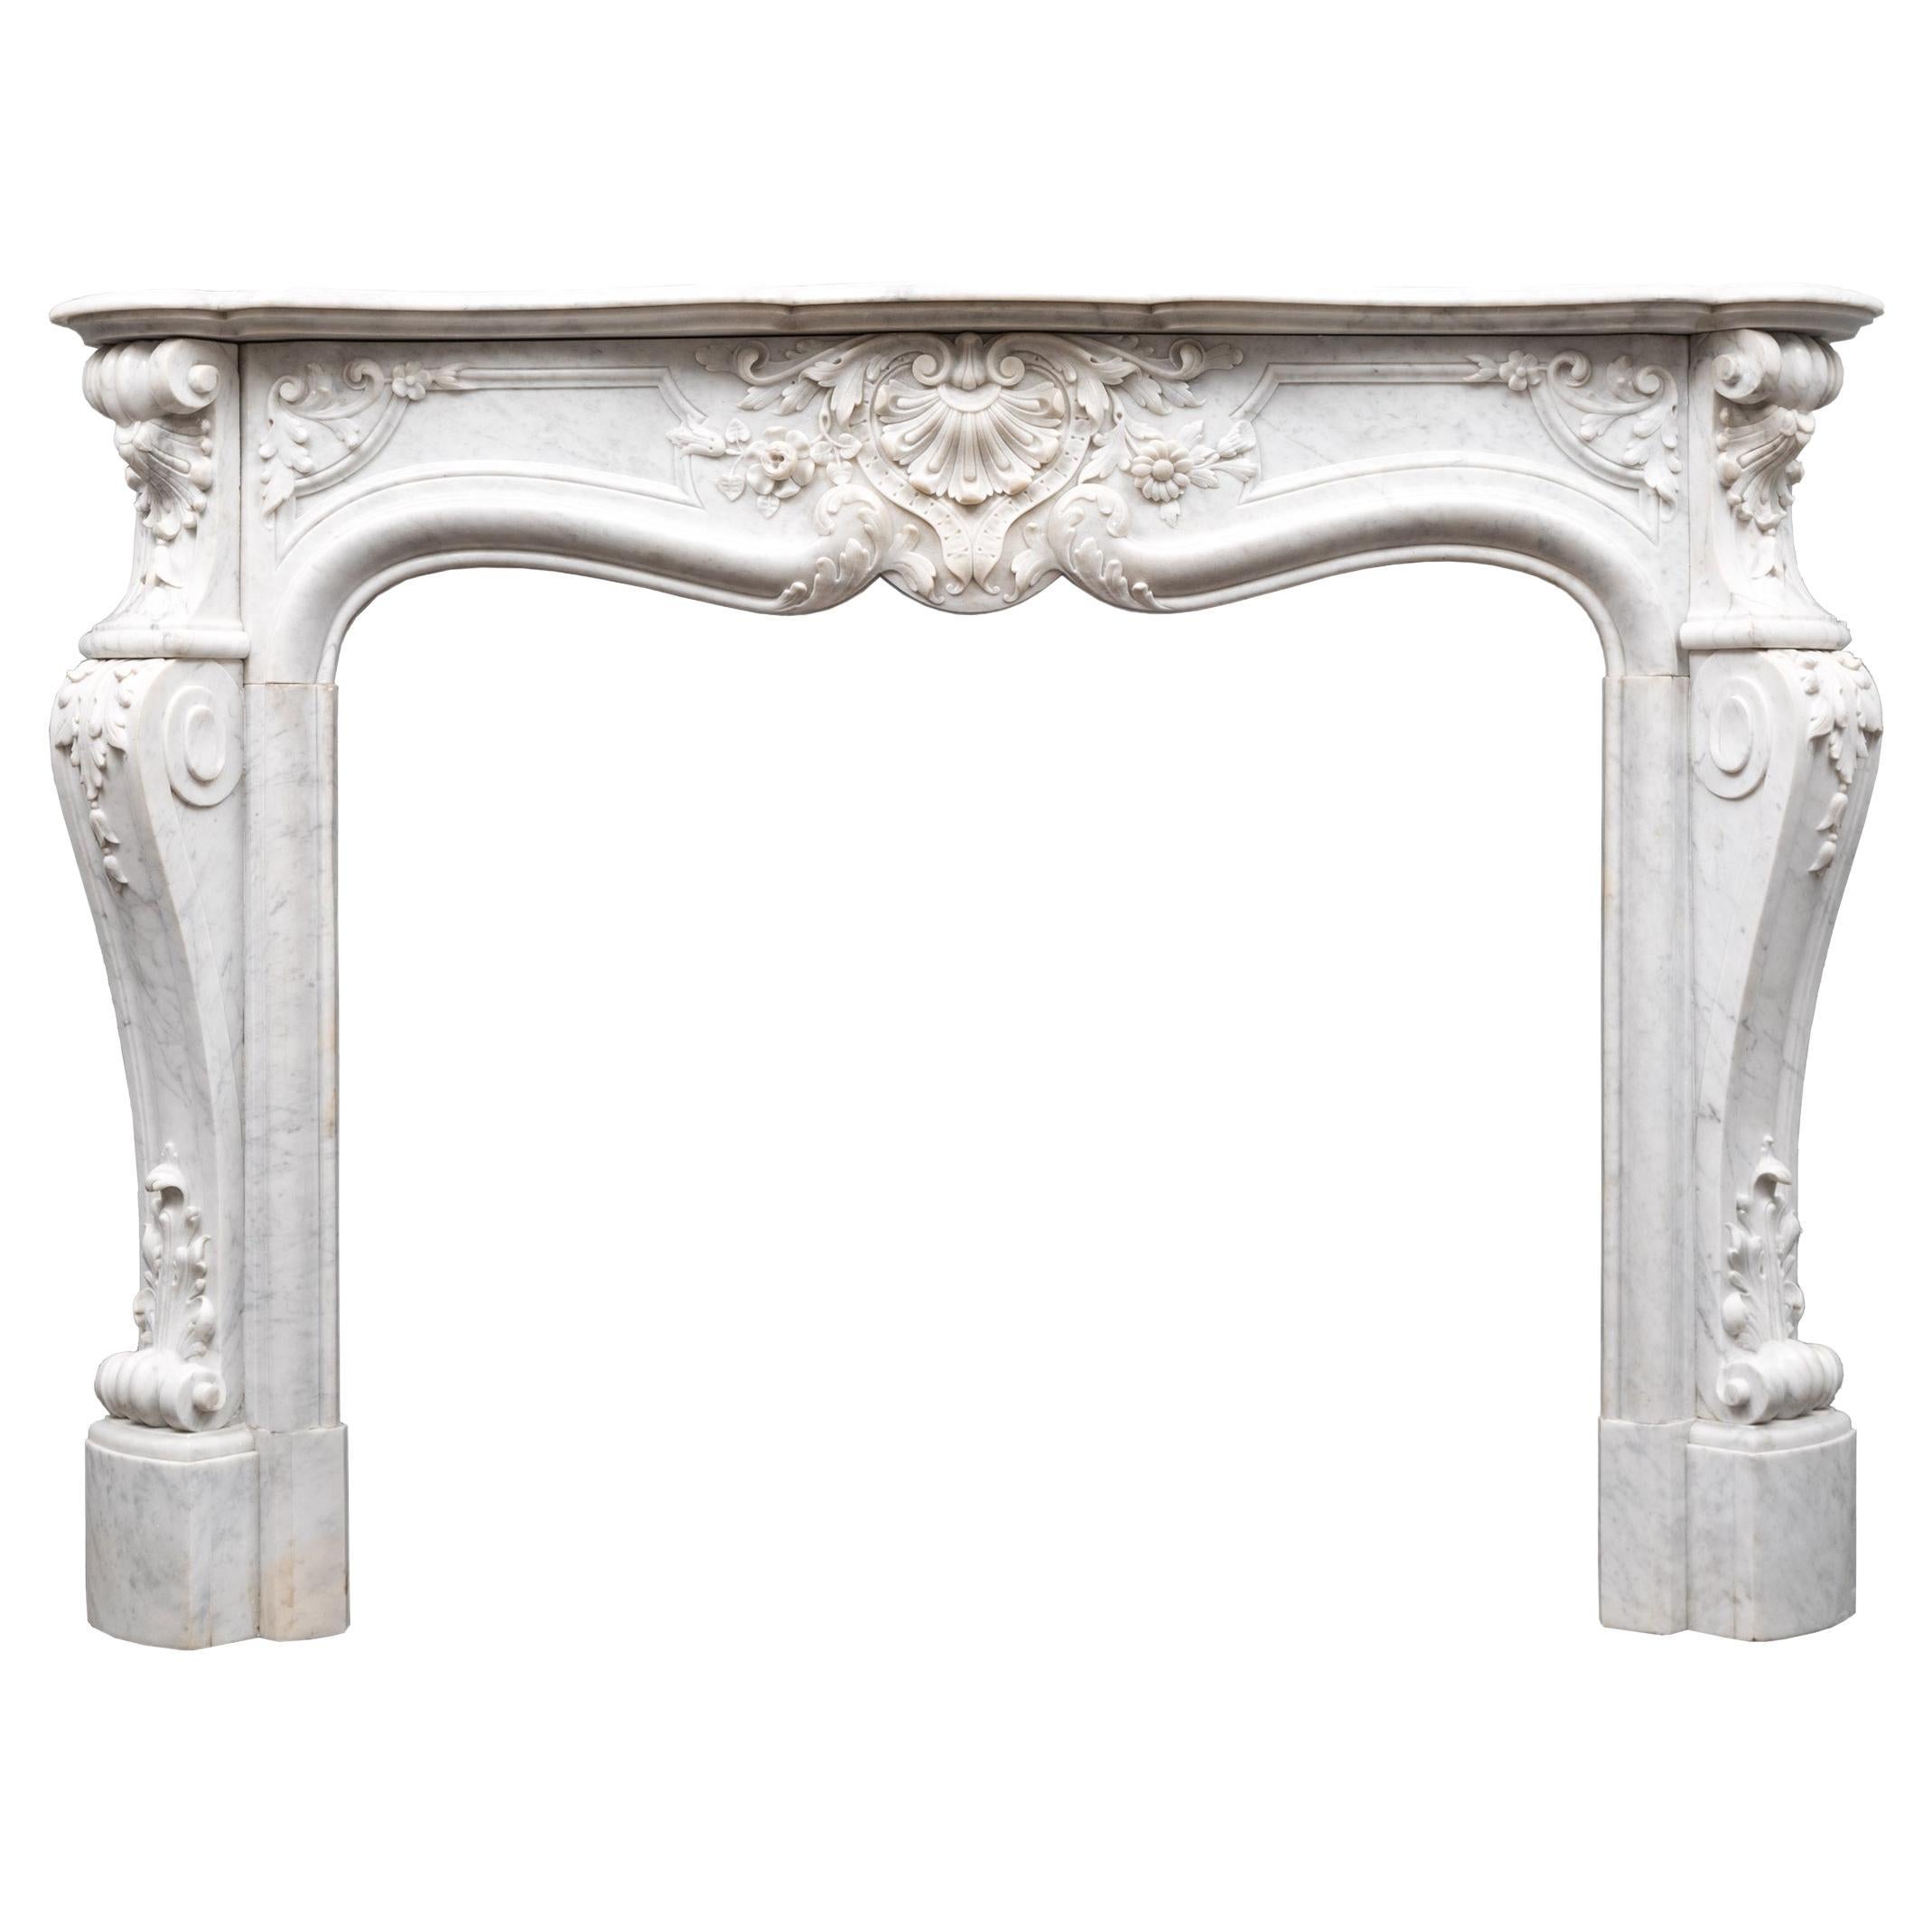 Large Antique French Carrara Marble Mantlepiece